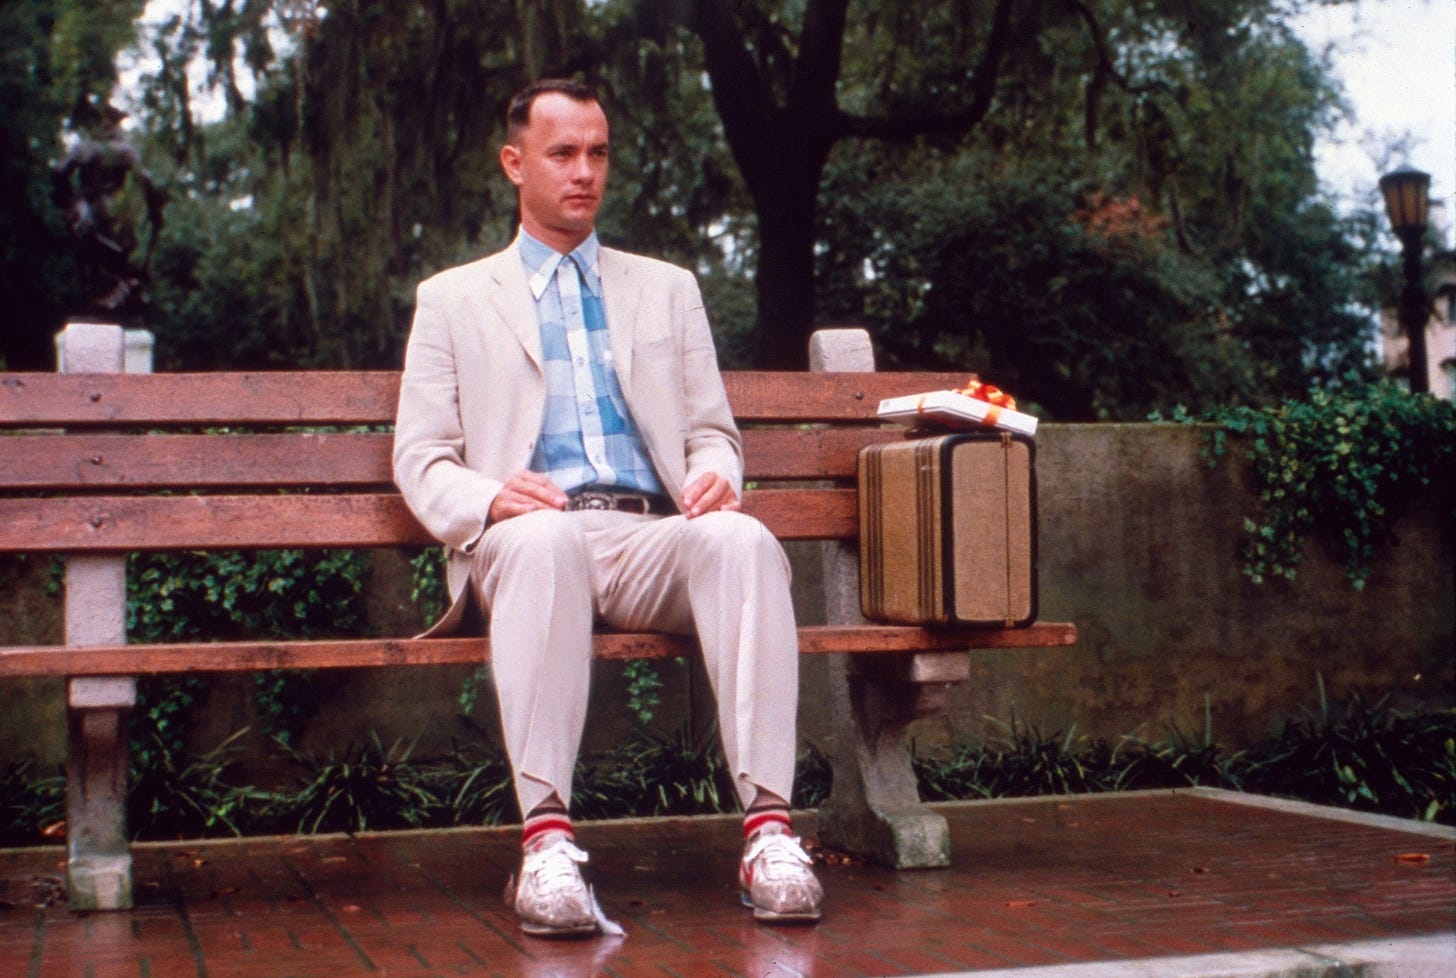 Film still from the opening scene of the movie Forrest Gump, Tom Hanks sits on a bench, box of chocolates and his suitcase on his left